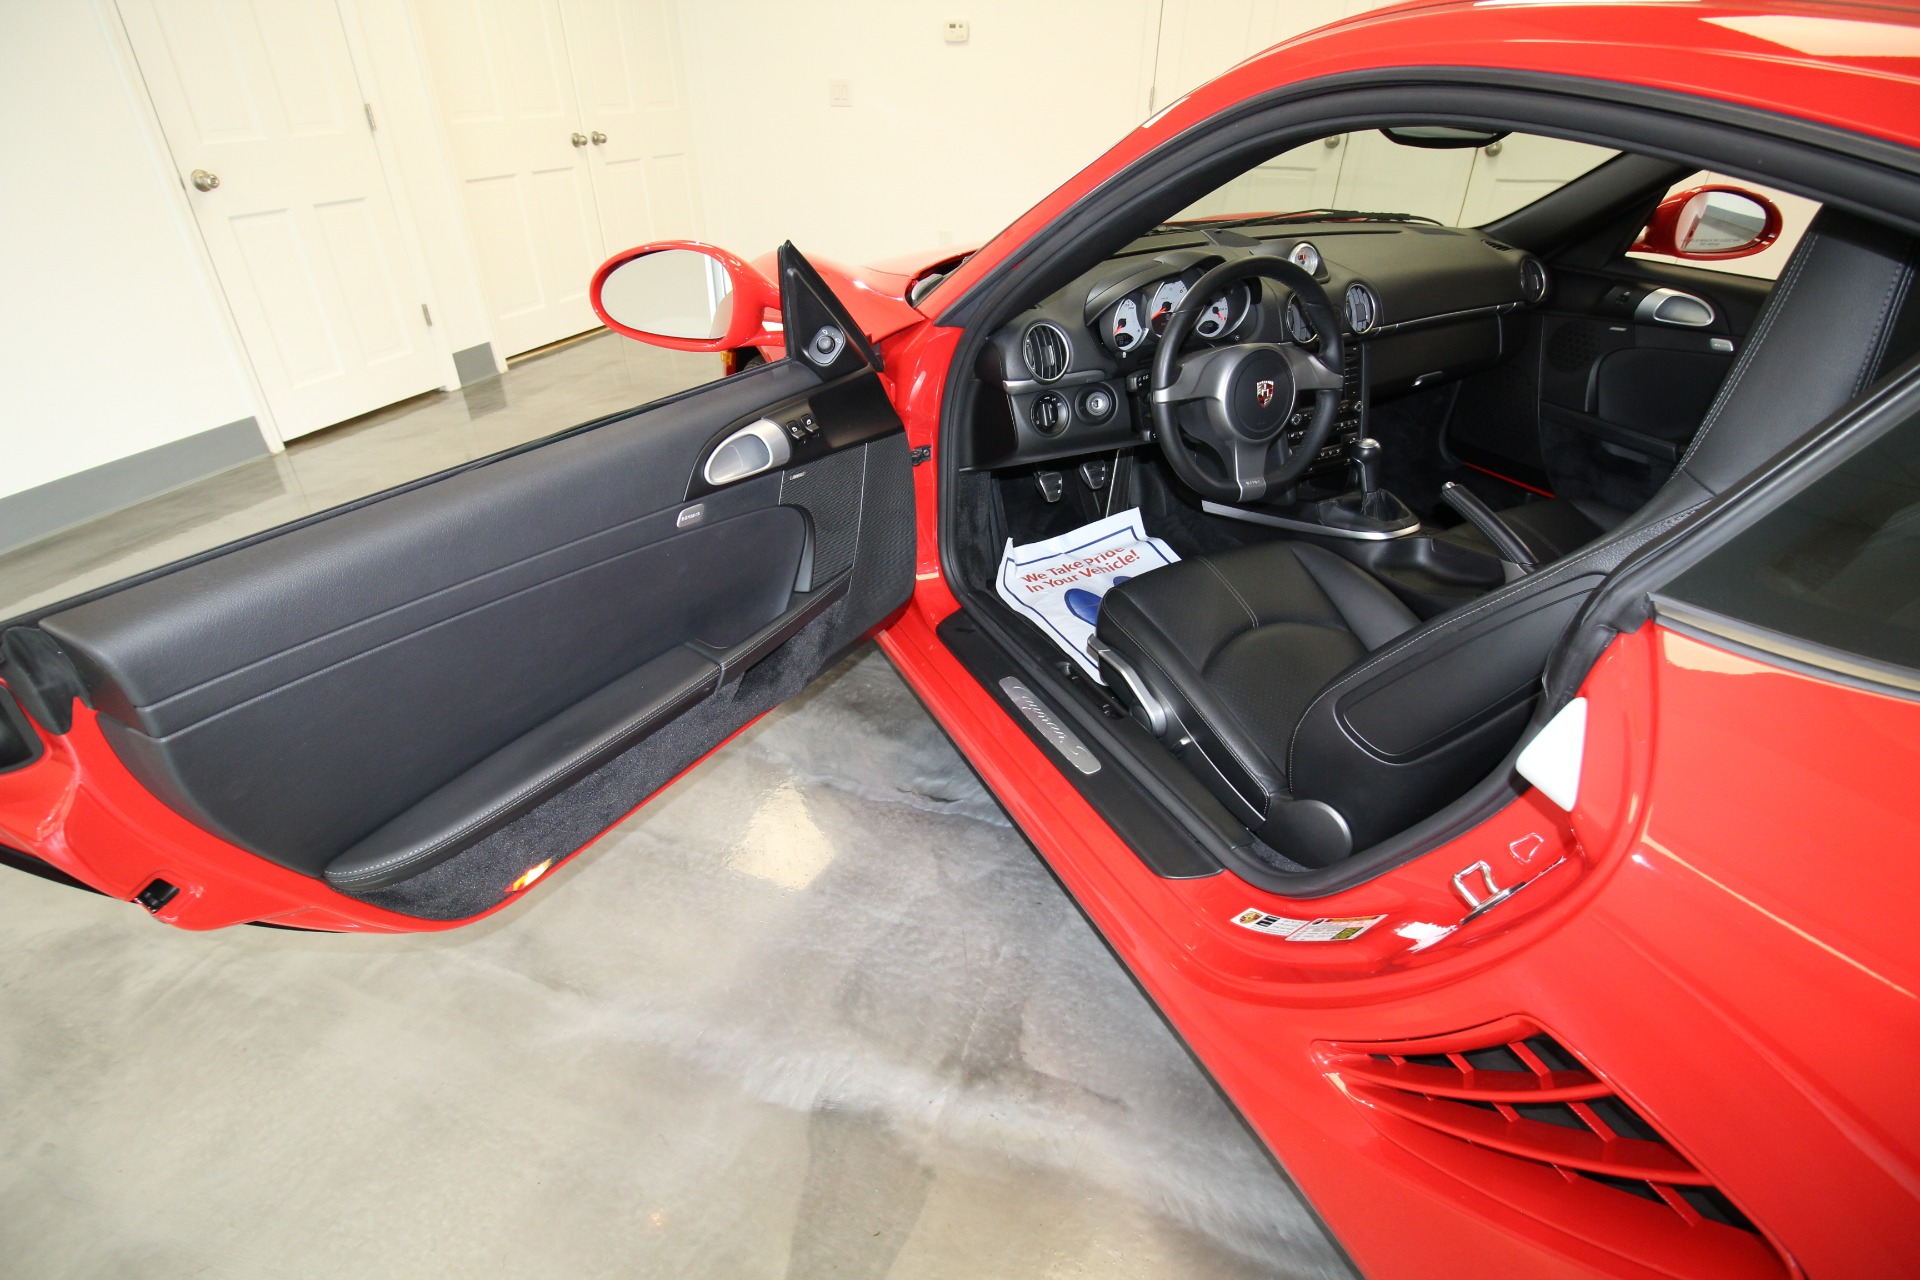 Used 2010 RED Porsche Cayman S LOCAL CAR SUPERB RARE 6 SPEED MANUAL | Albany, NY